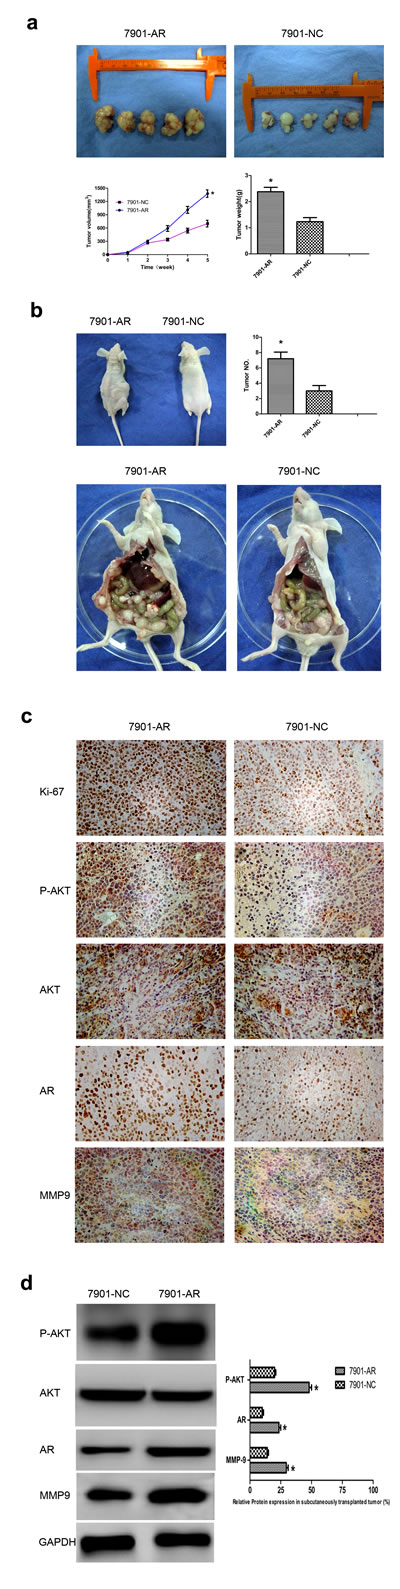 Fig.6: Overexpression of AR promotes tumor growth and migration